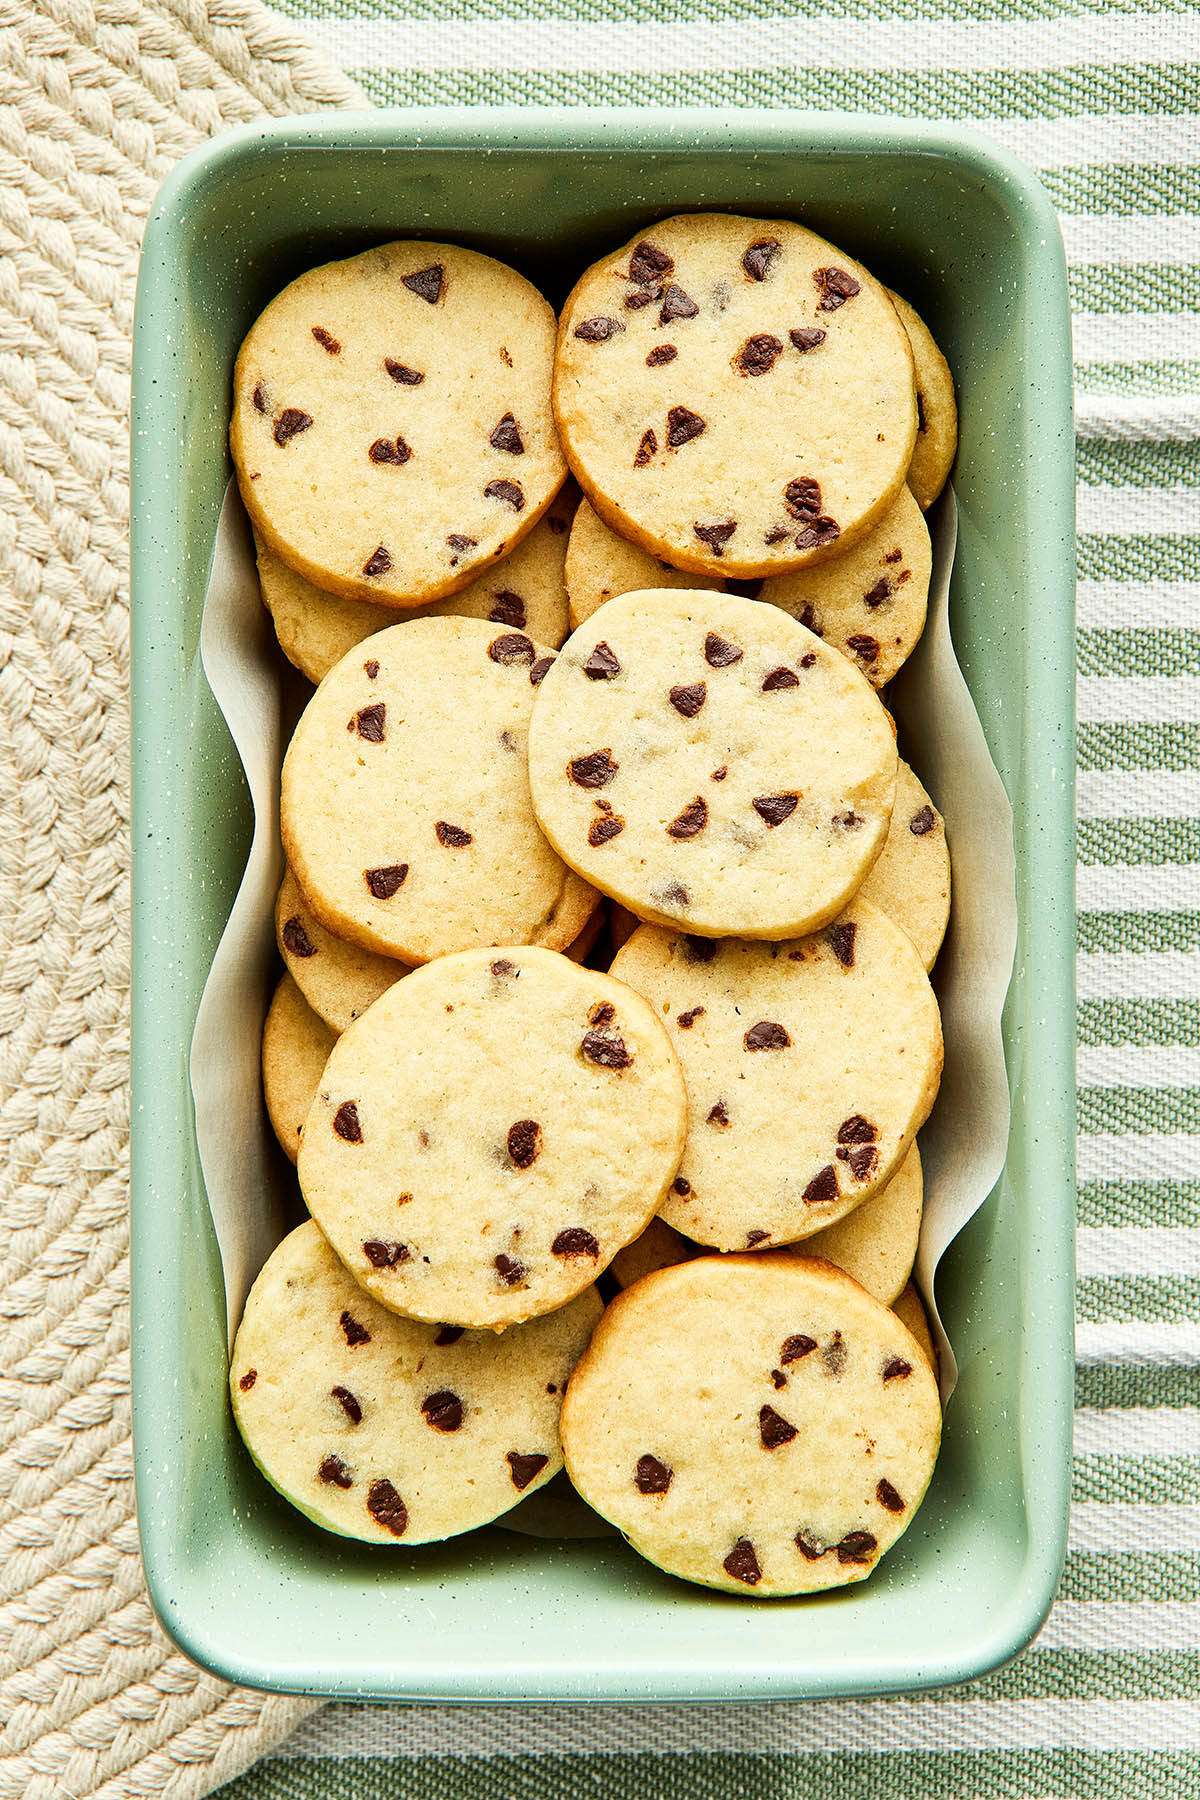 Chocolate chip sugar cookies in a mint green loaf tin lined with a white parchment paper circle on a green and white striped background with a knitted trivet covering part of the background.